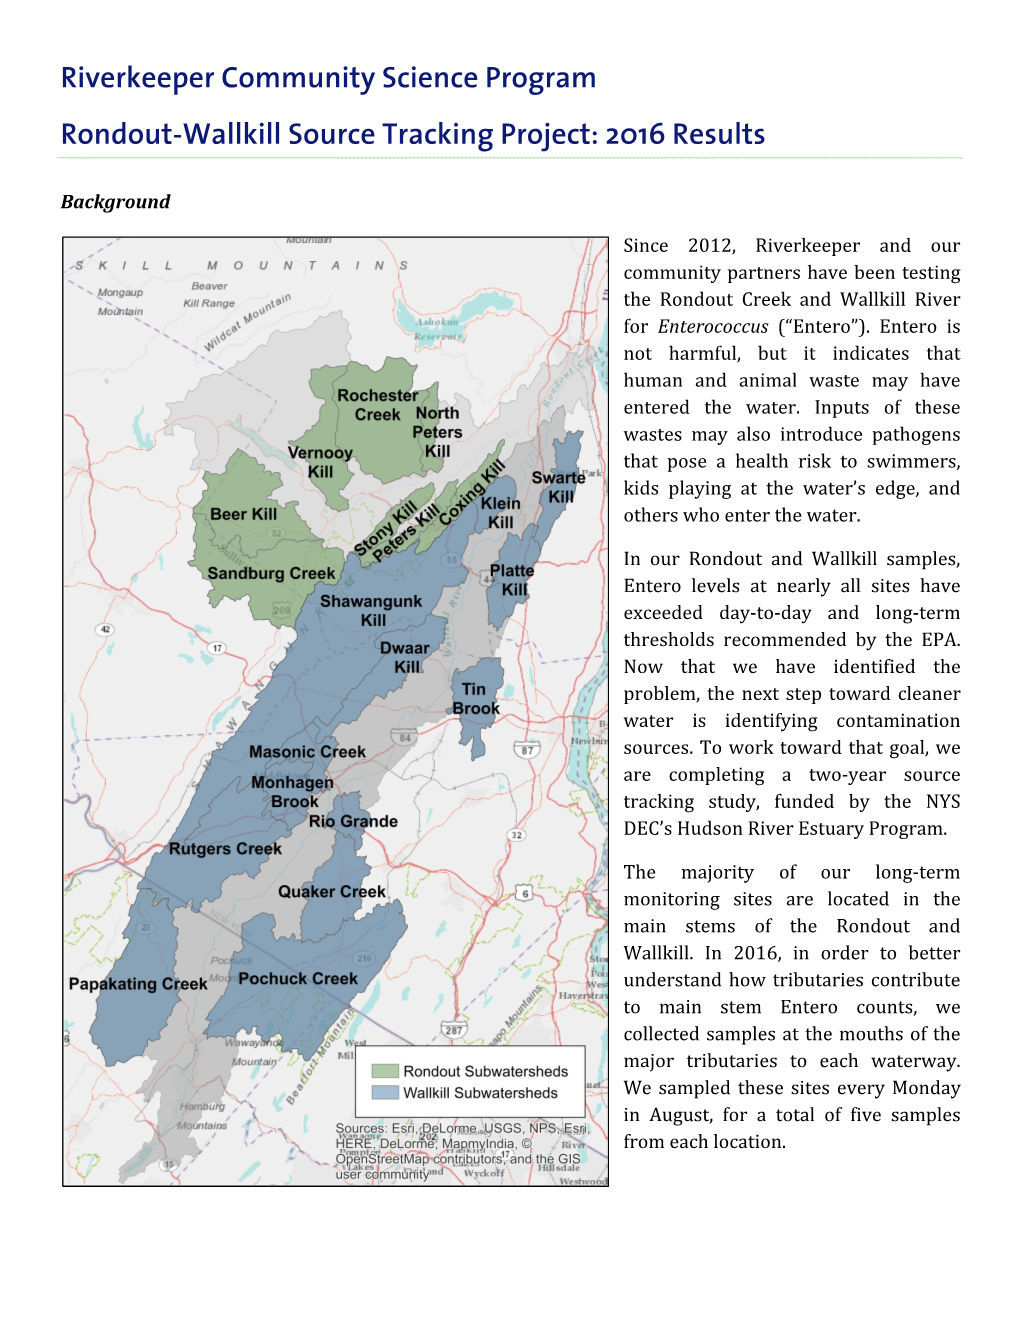 Riverkeeper Community Science Program Rondout-Wallkill Source Tracking Project: 2016 Results